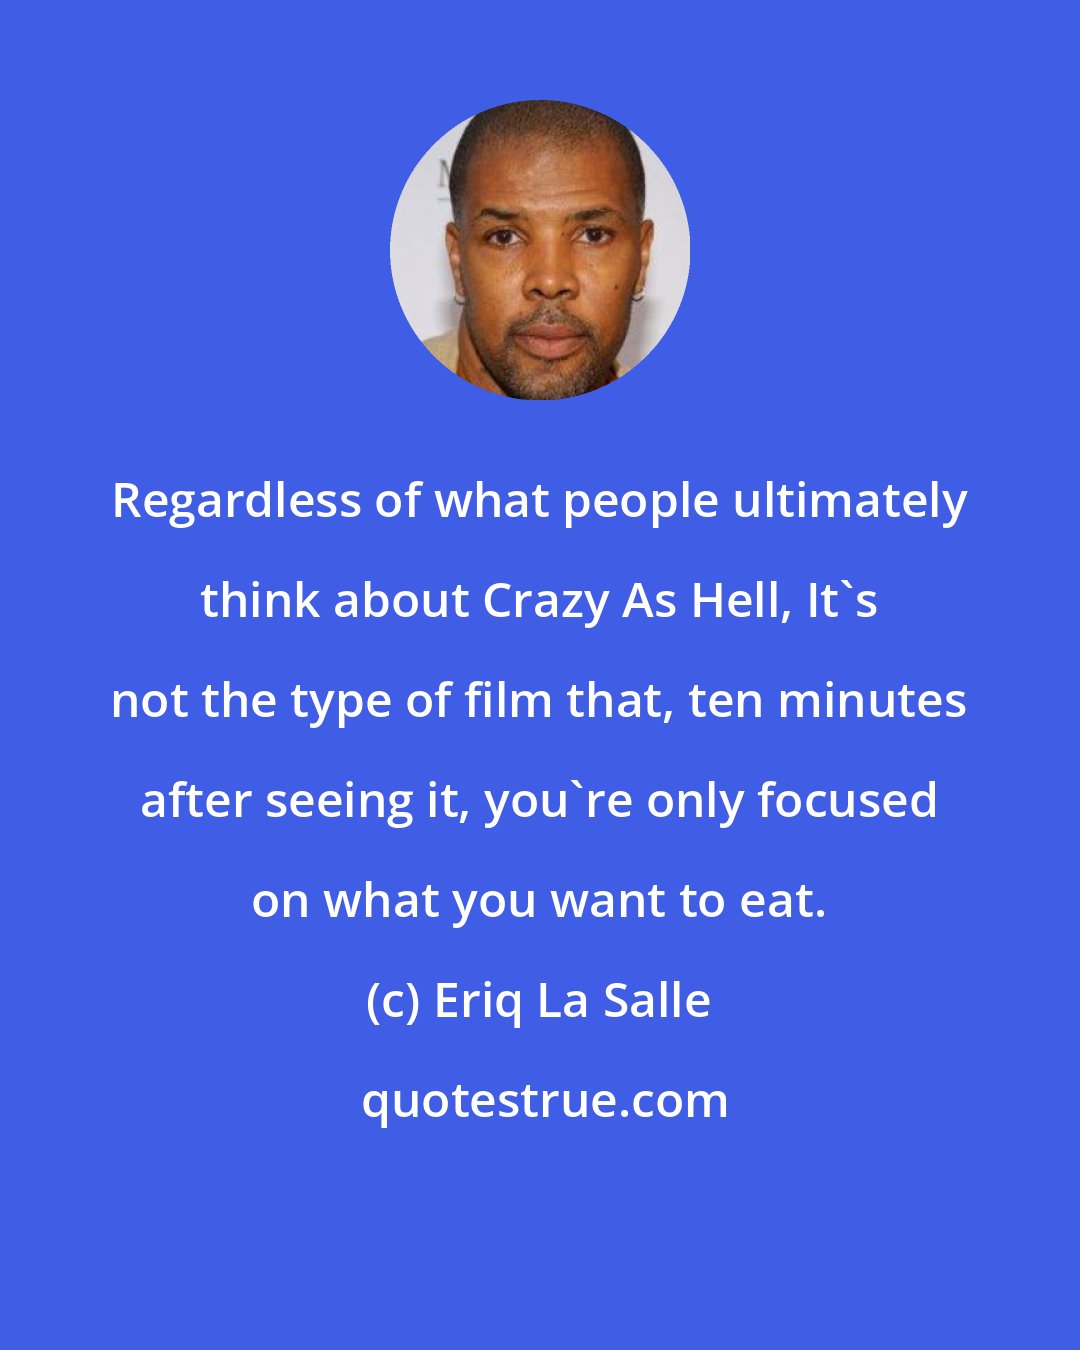 Eriq La Salle: Regardless of what people ultimately think about Crazy As Hell, It's not the type of film that, ten minutes after seeing it, you're only focused on what you want to eat.